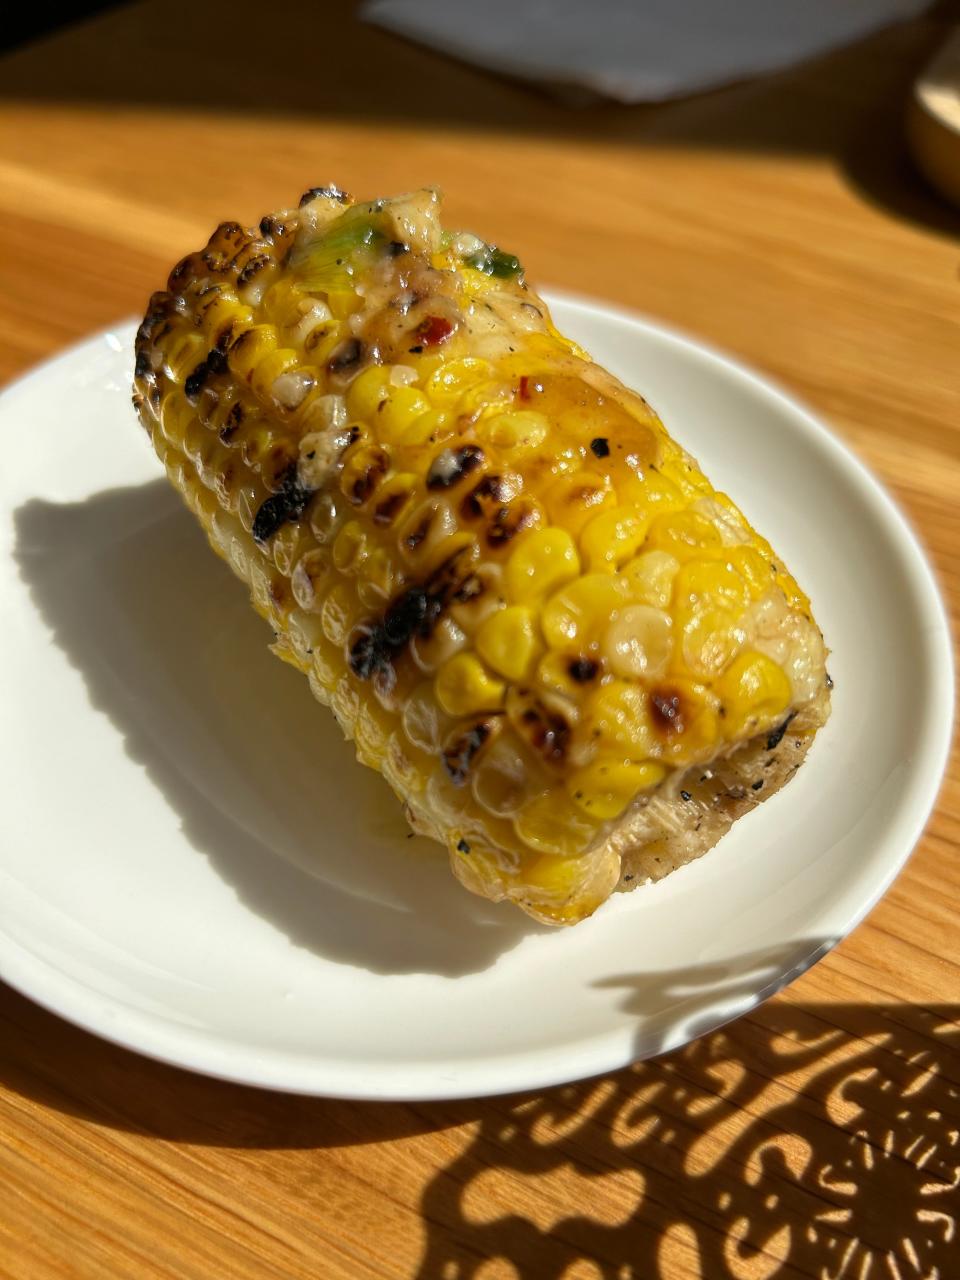 Roasted street corn with parmesan cheese at SRINA Tea House & Cafe.